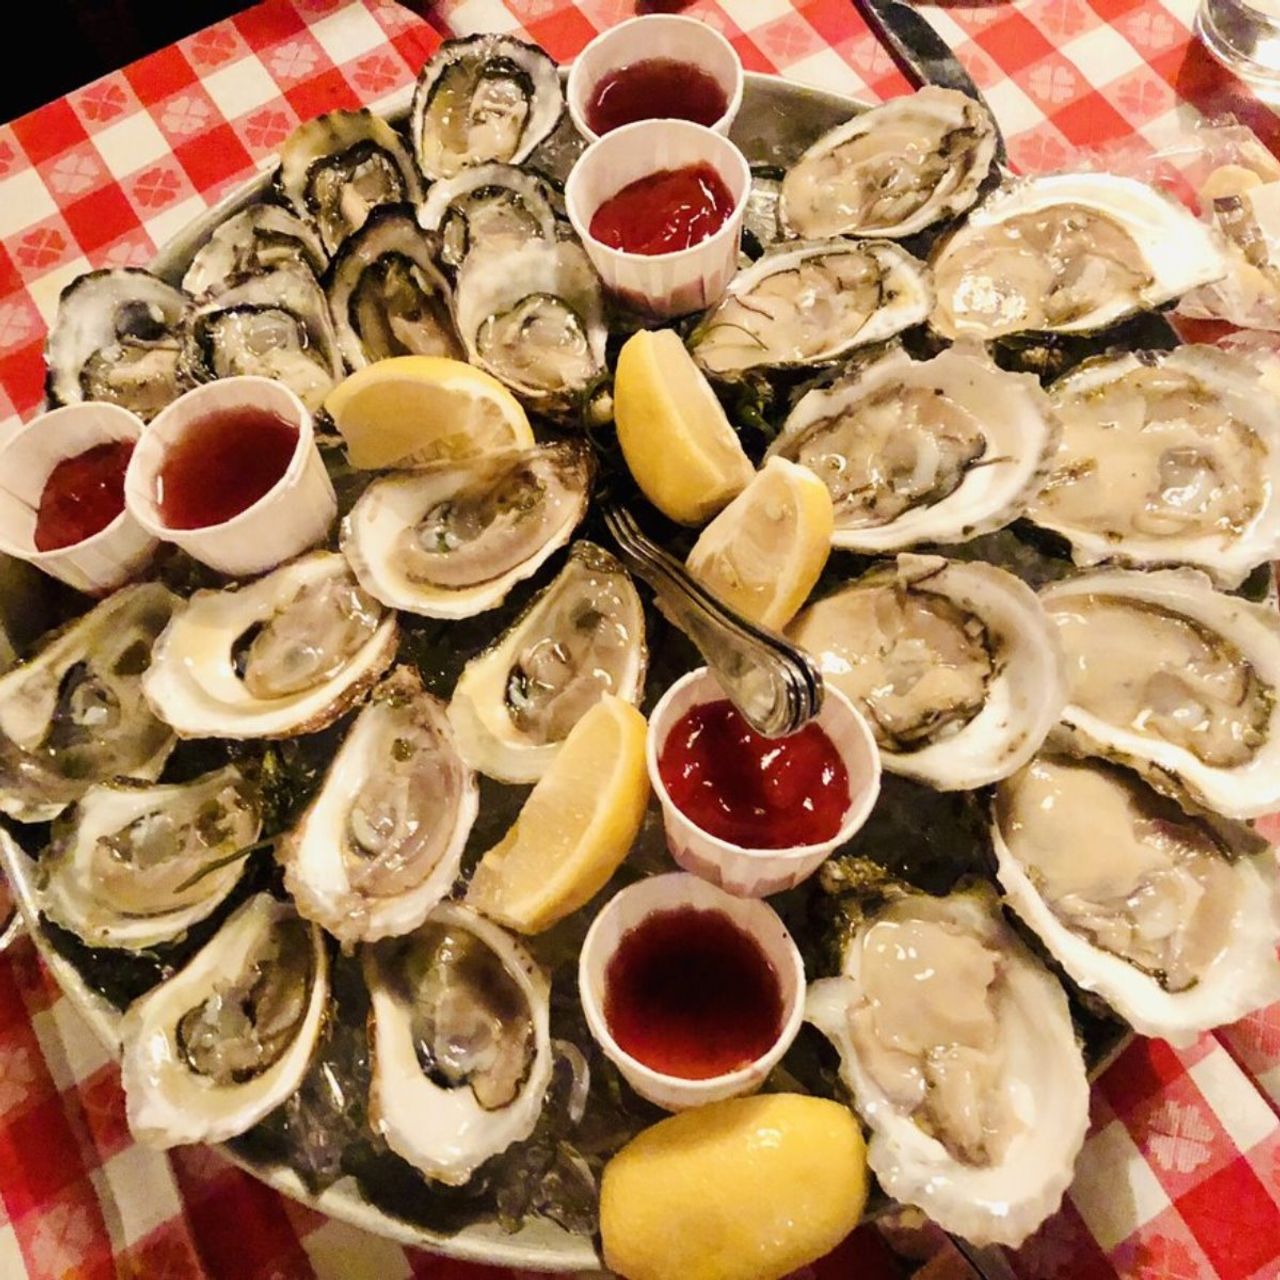 The Oyster Bar, Hours + Location